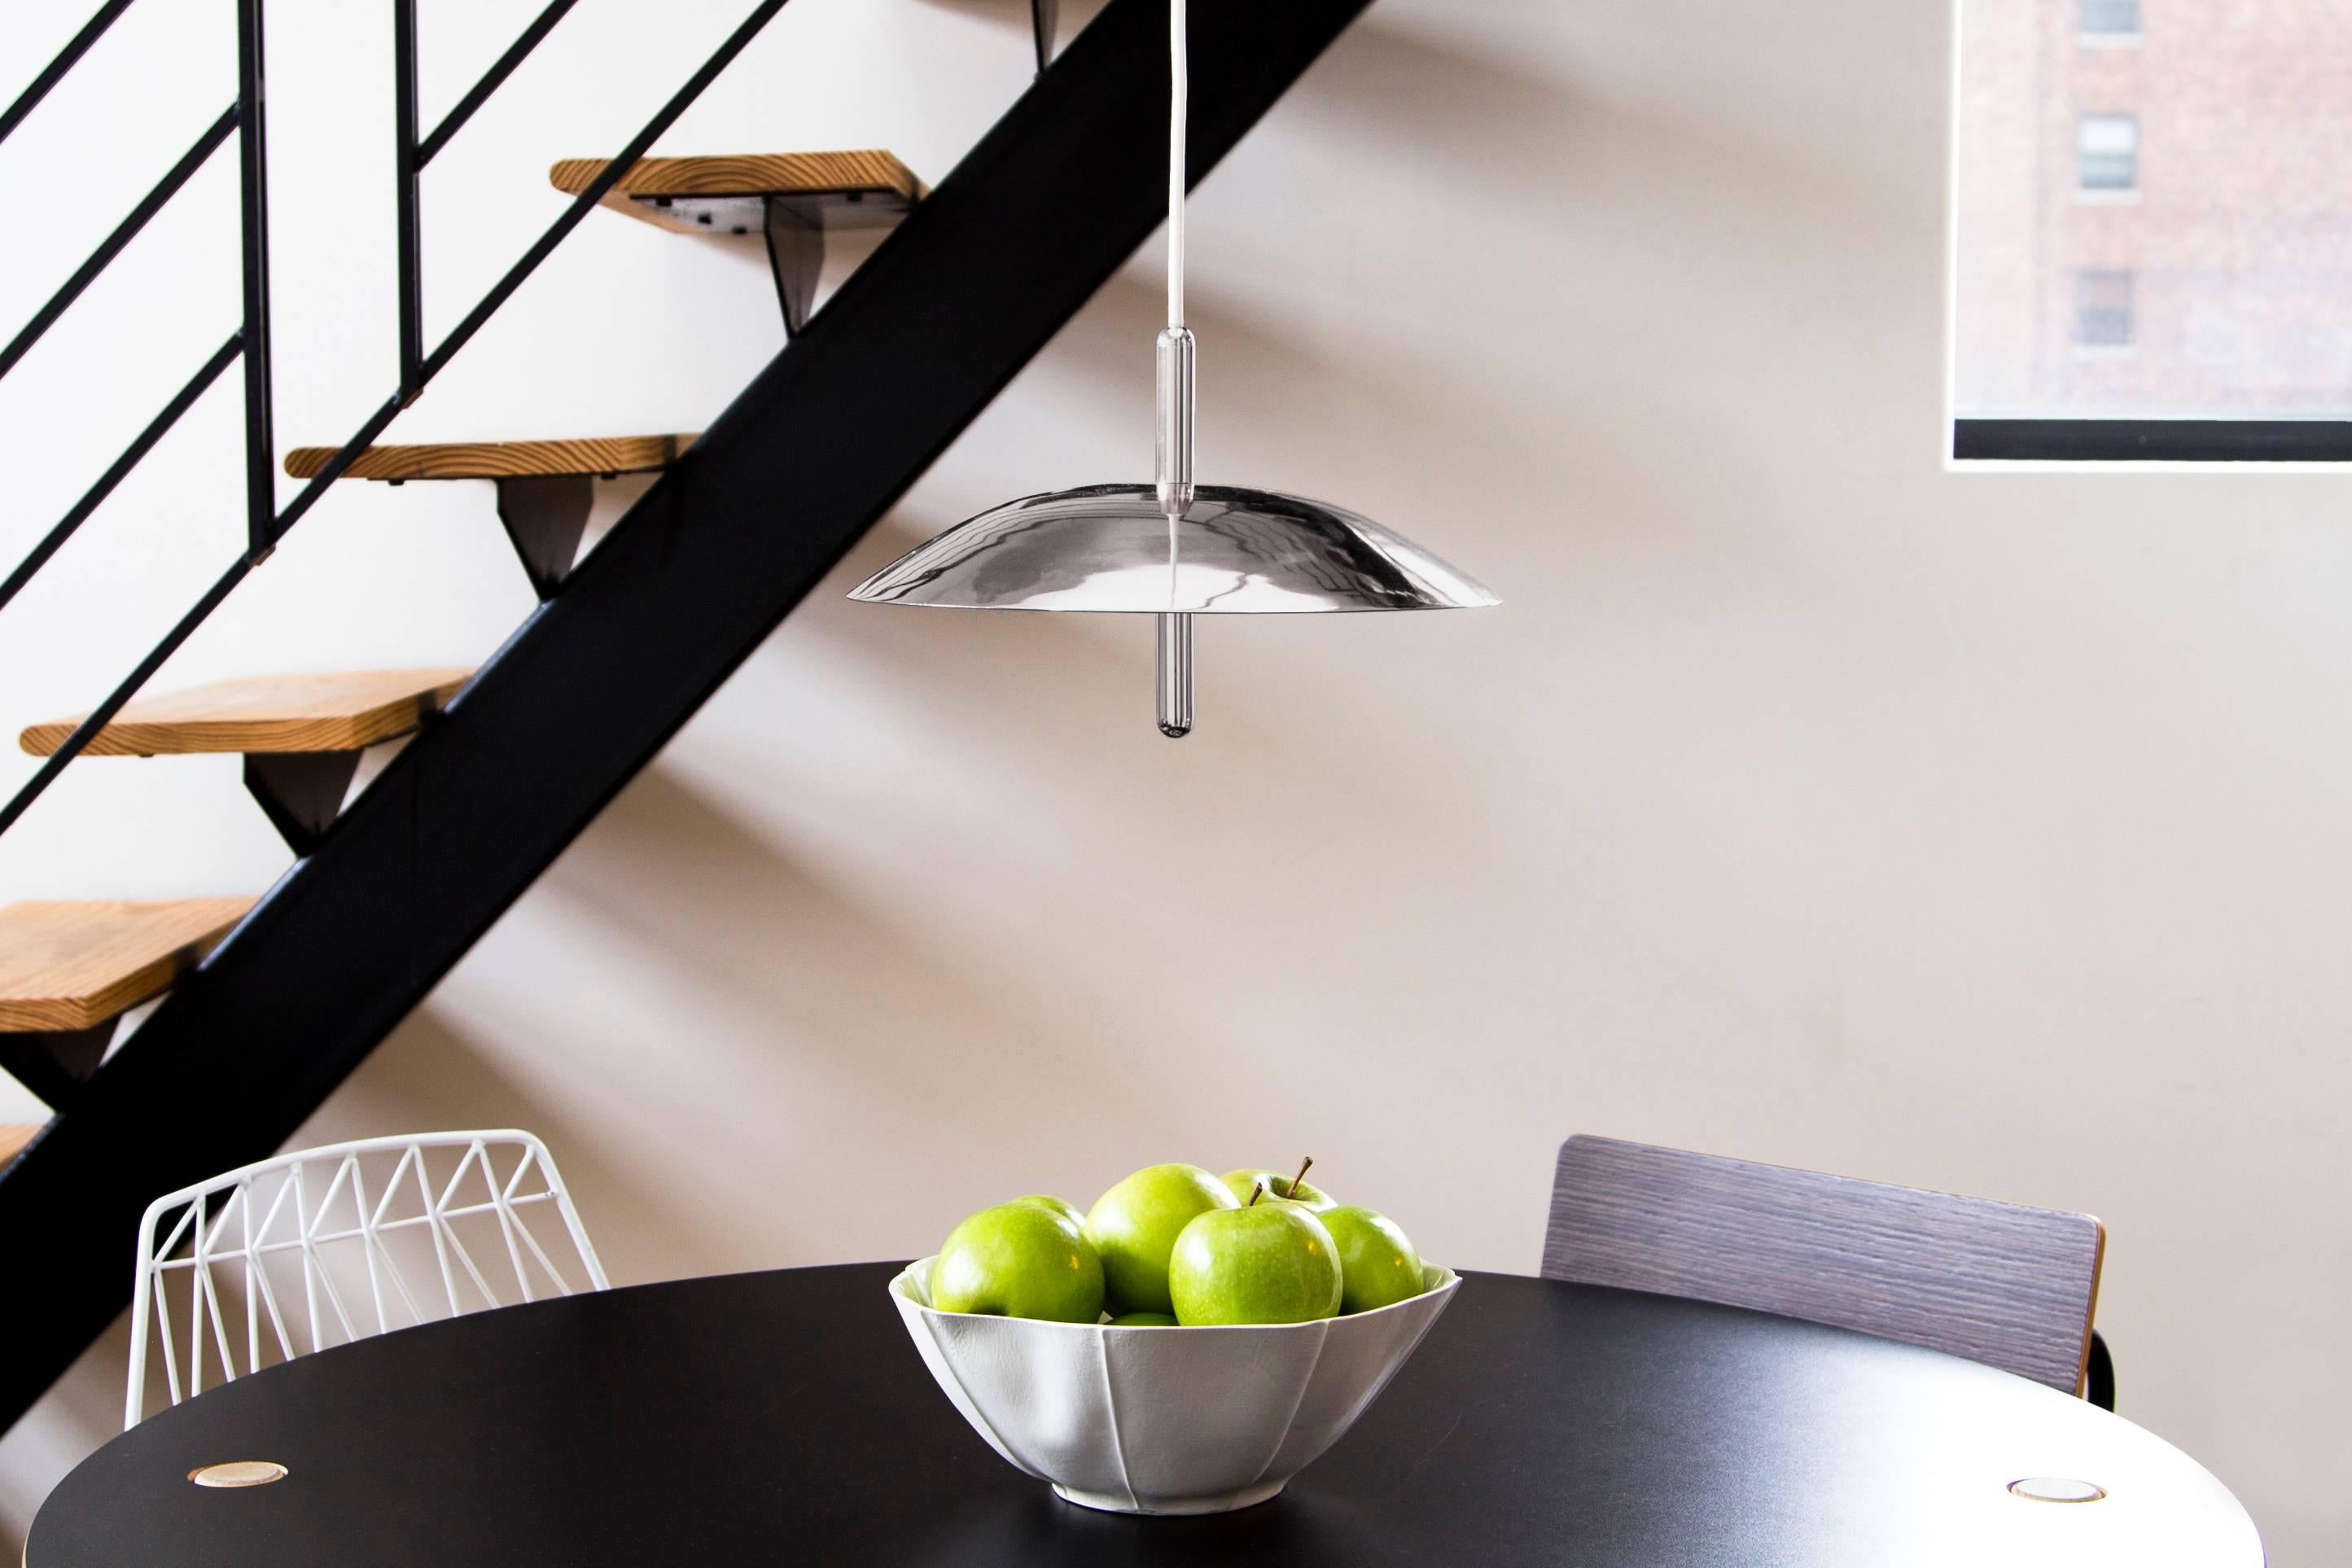 Utilizing warm LEDs and indirect light, signal pendants hover above any interior like a celestial body emitting a comforting glow. Consisting of a spun metal shade pierced by a polished central stem, the signal pendant is minimal and expressive.